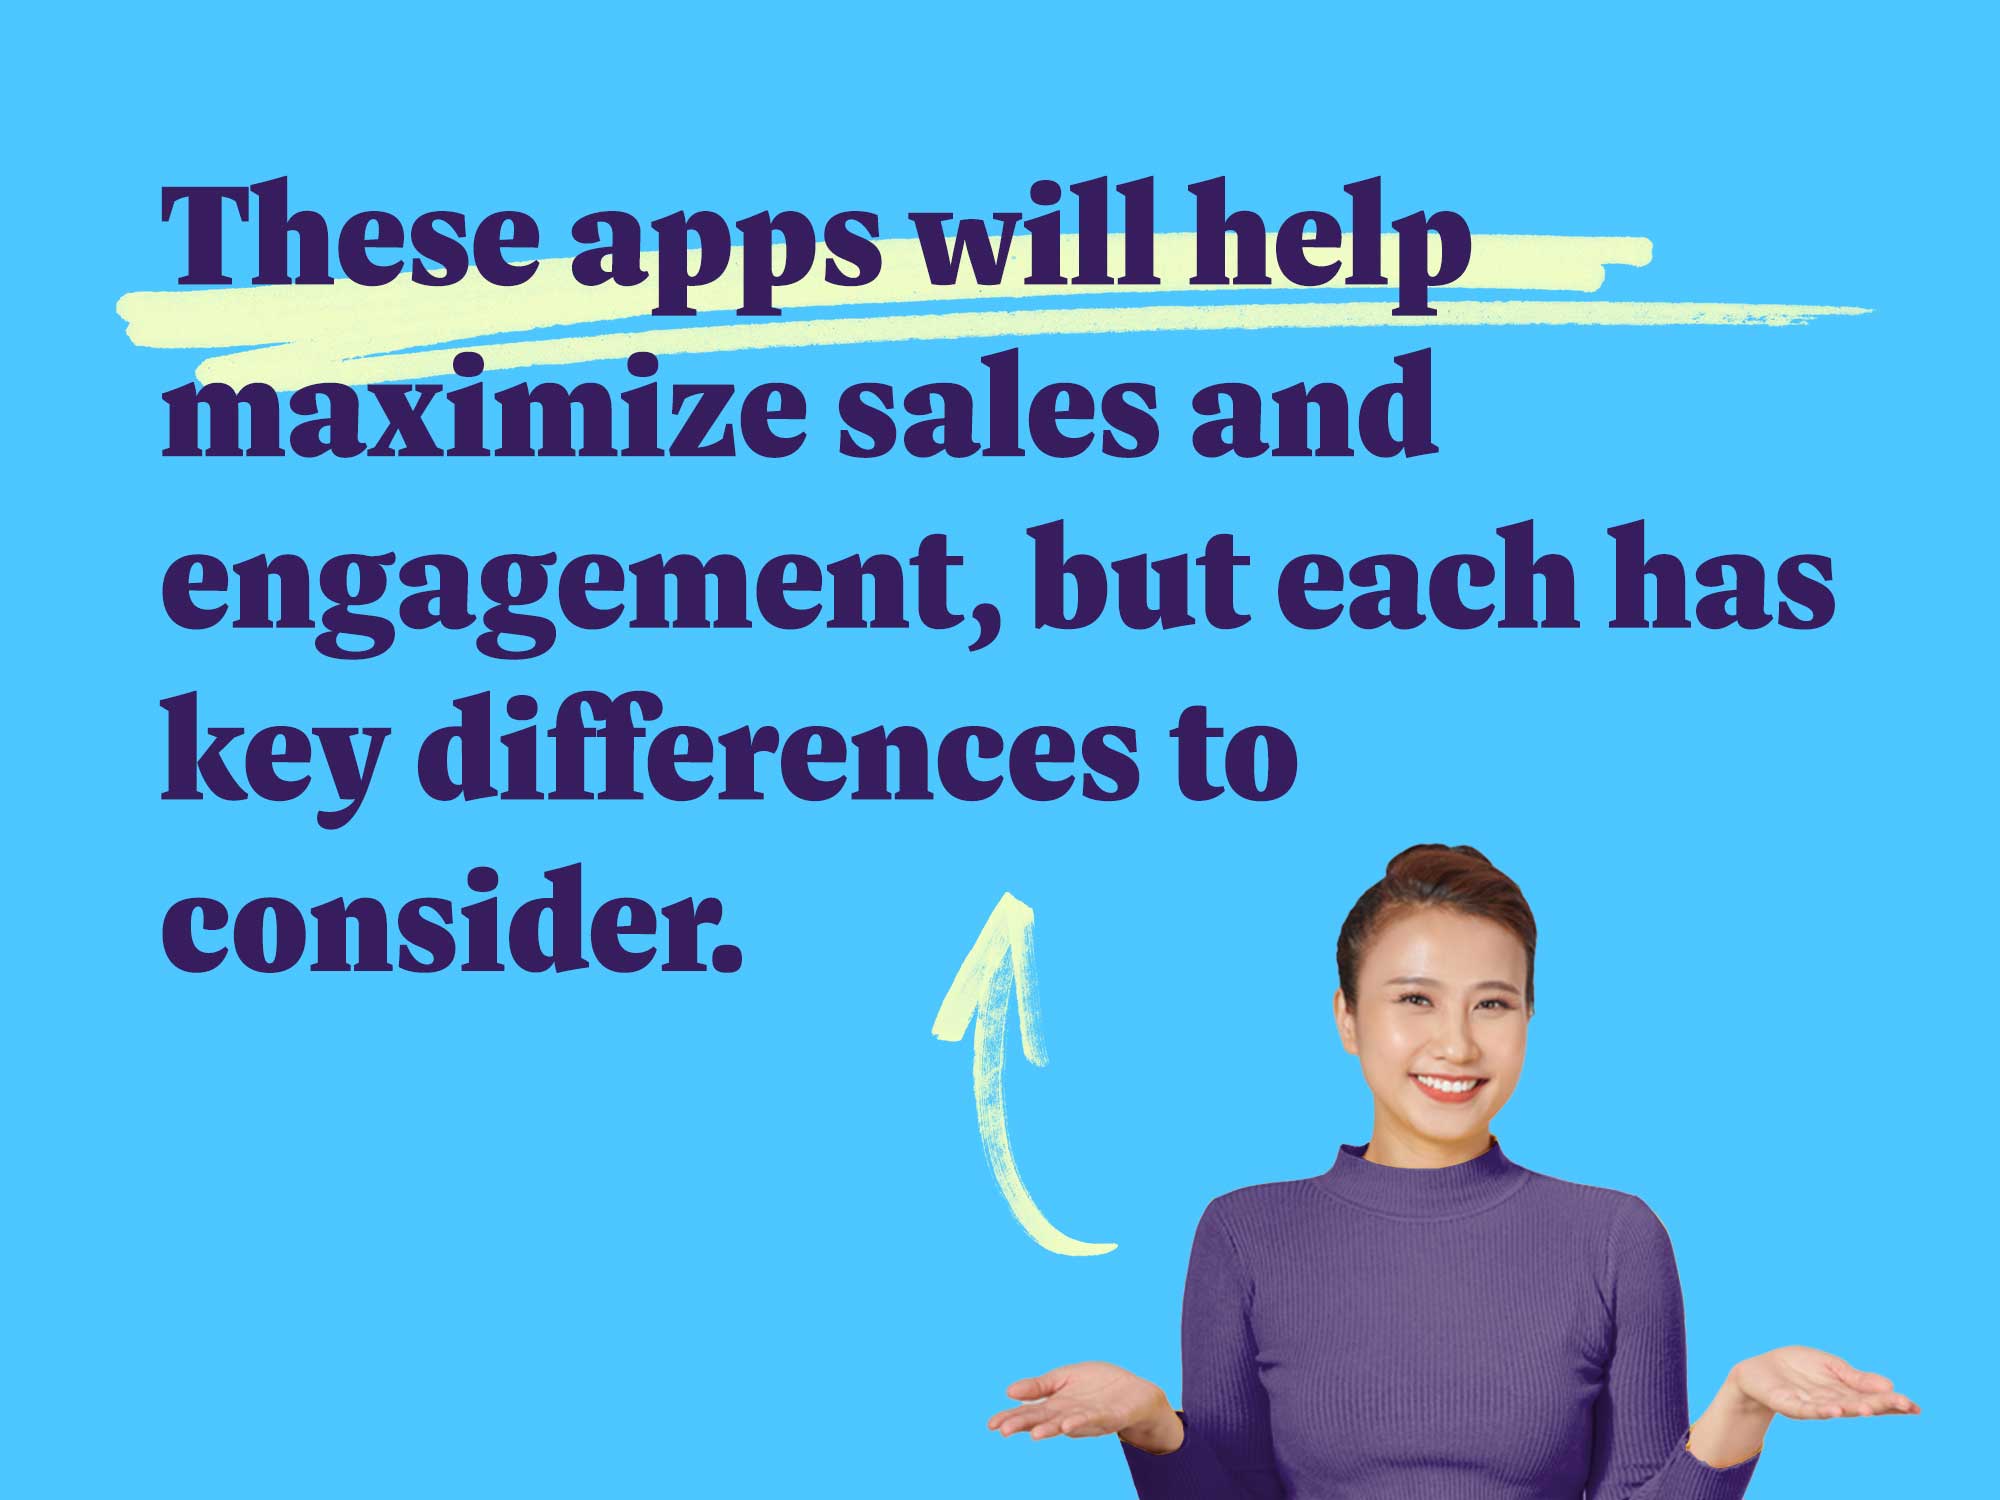 These apps will help maximize sales and engagement, but each has key differences to consider.